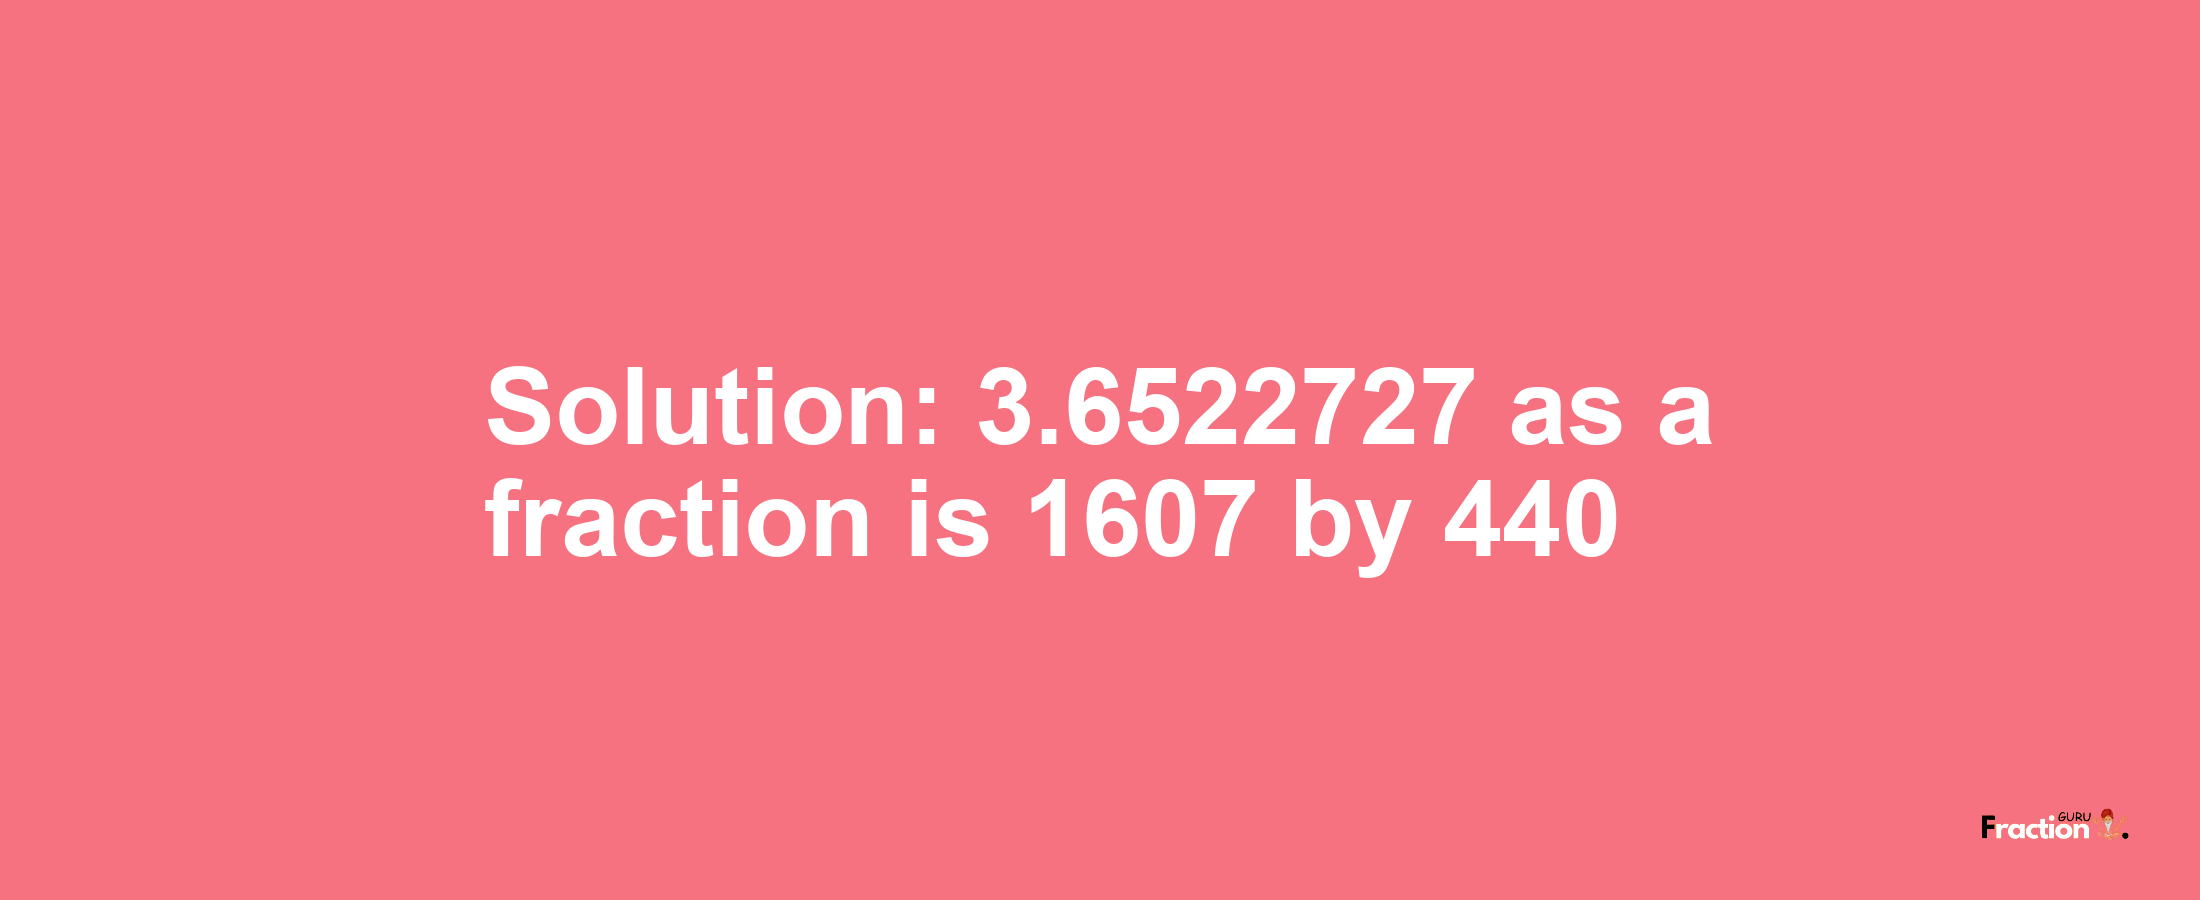 Solution:3.6522727 as a fraction is 1607/440